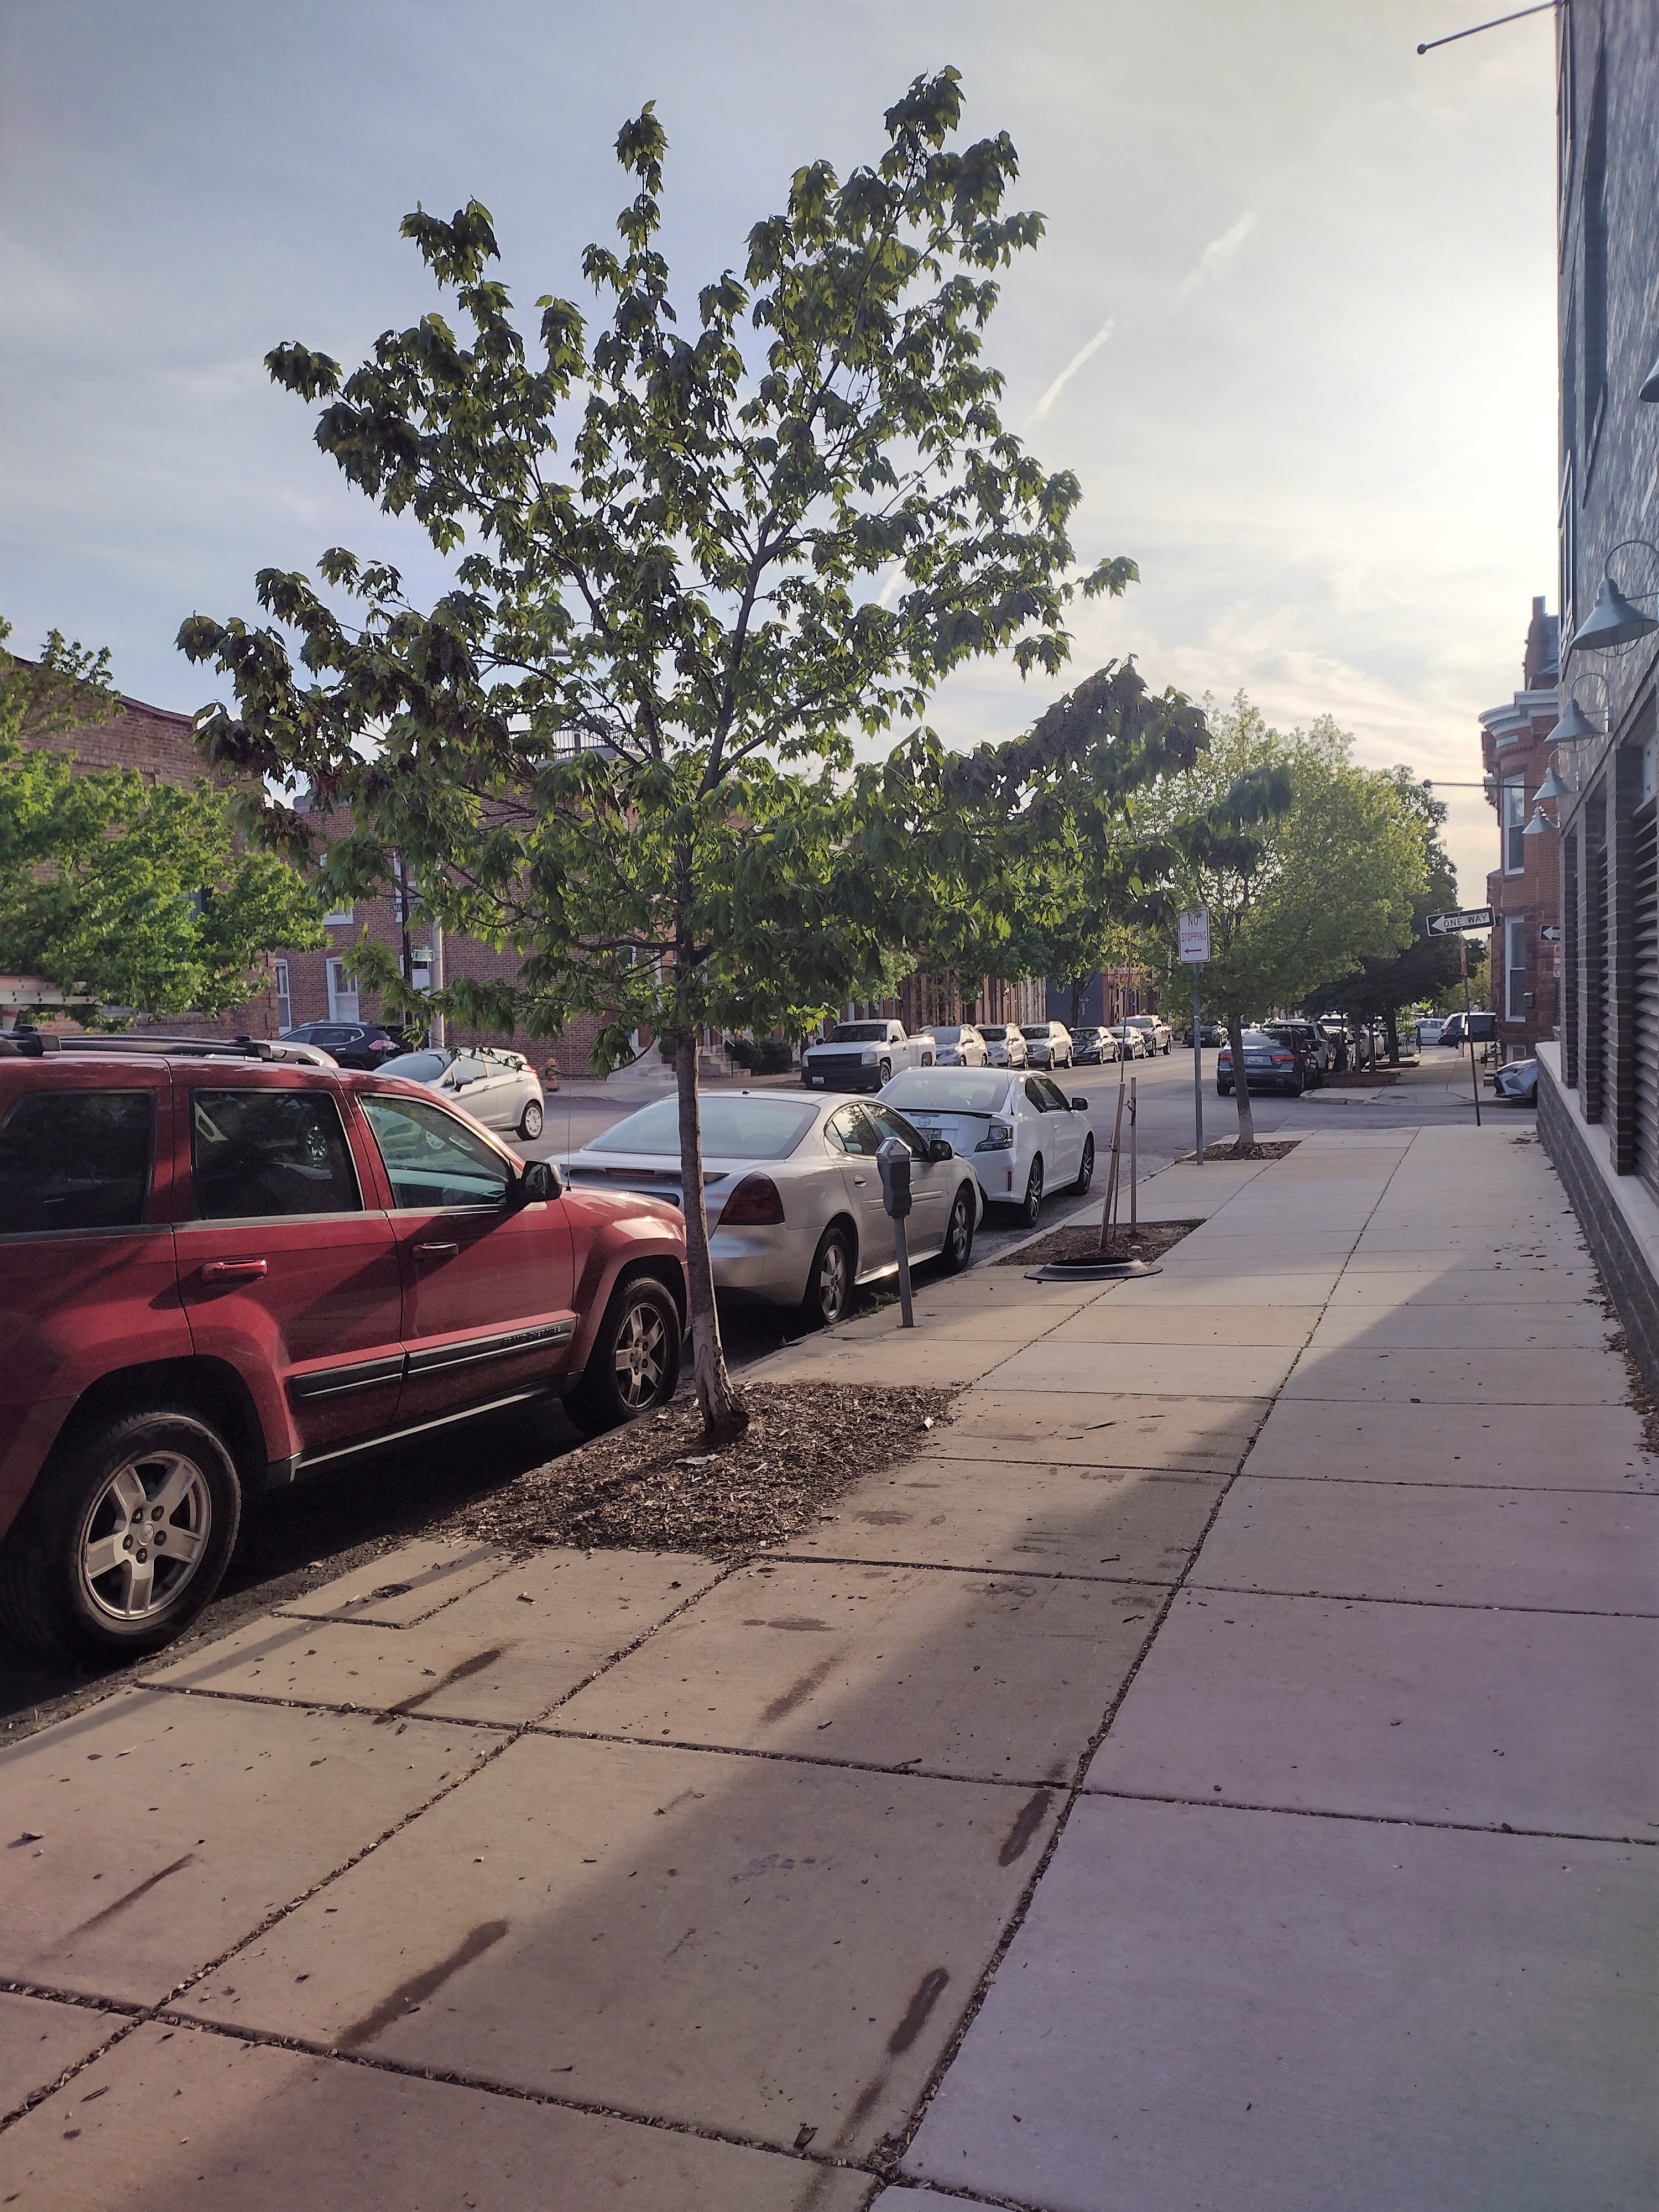 Young trees lining a street in Baltimore. Image courtesy of Meghan Avolio.